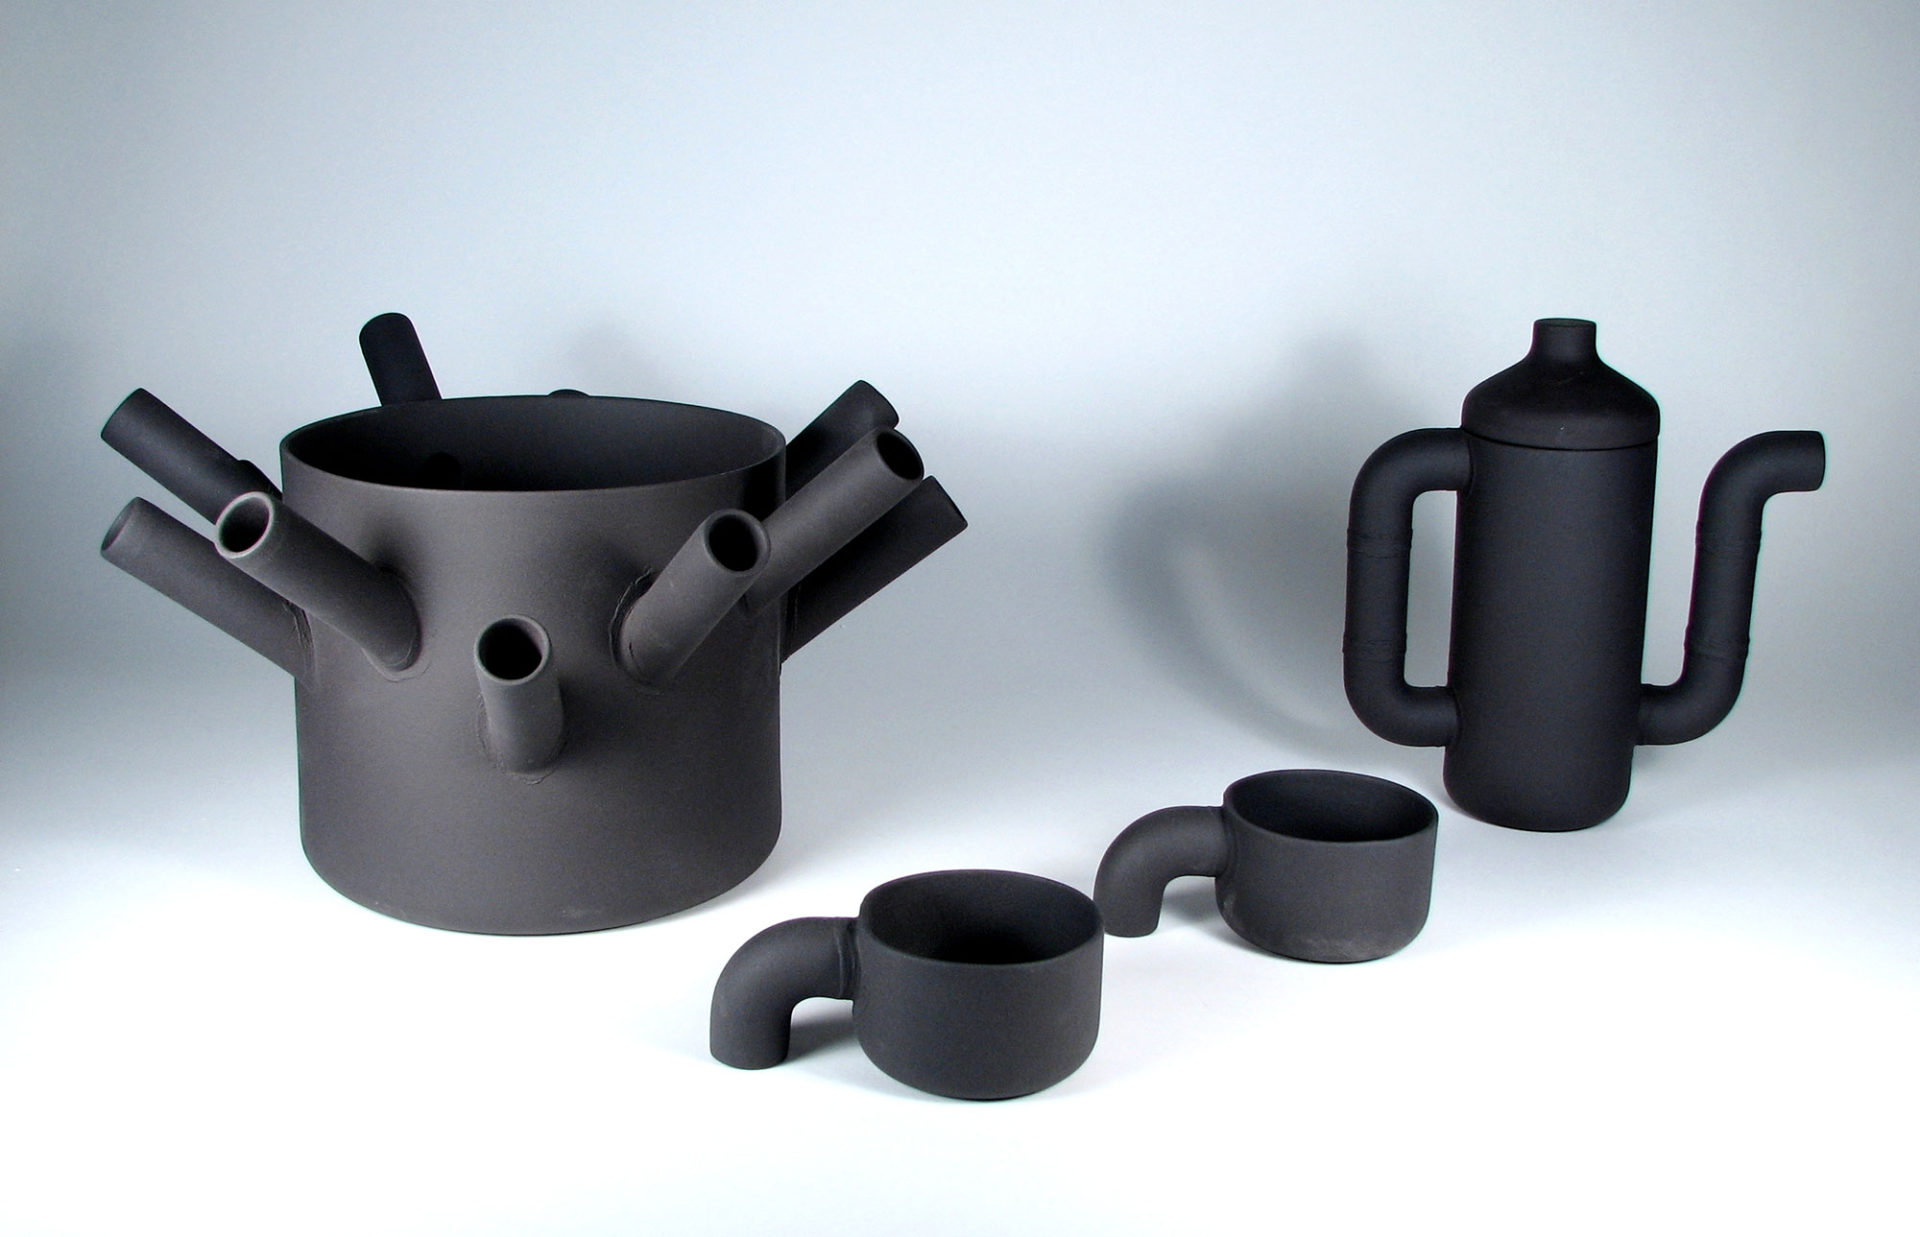 Vase, coffee pot and cups in charcoal grey with elements made to look like pieces of plumbing pipe.